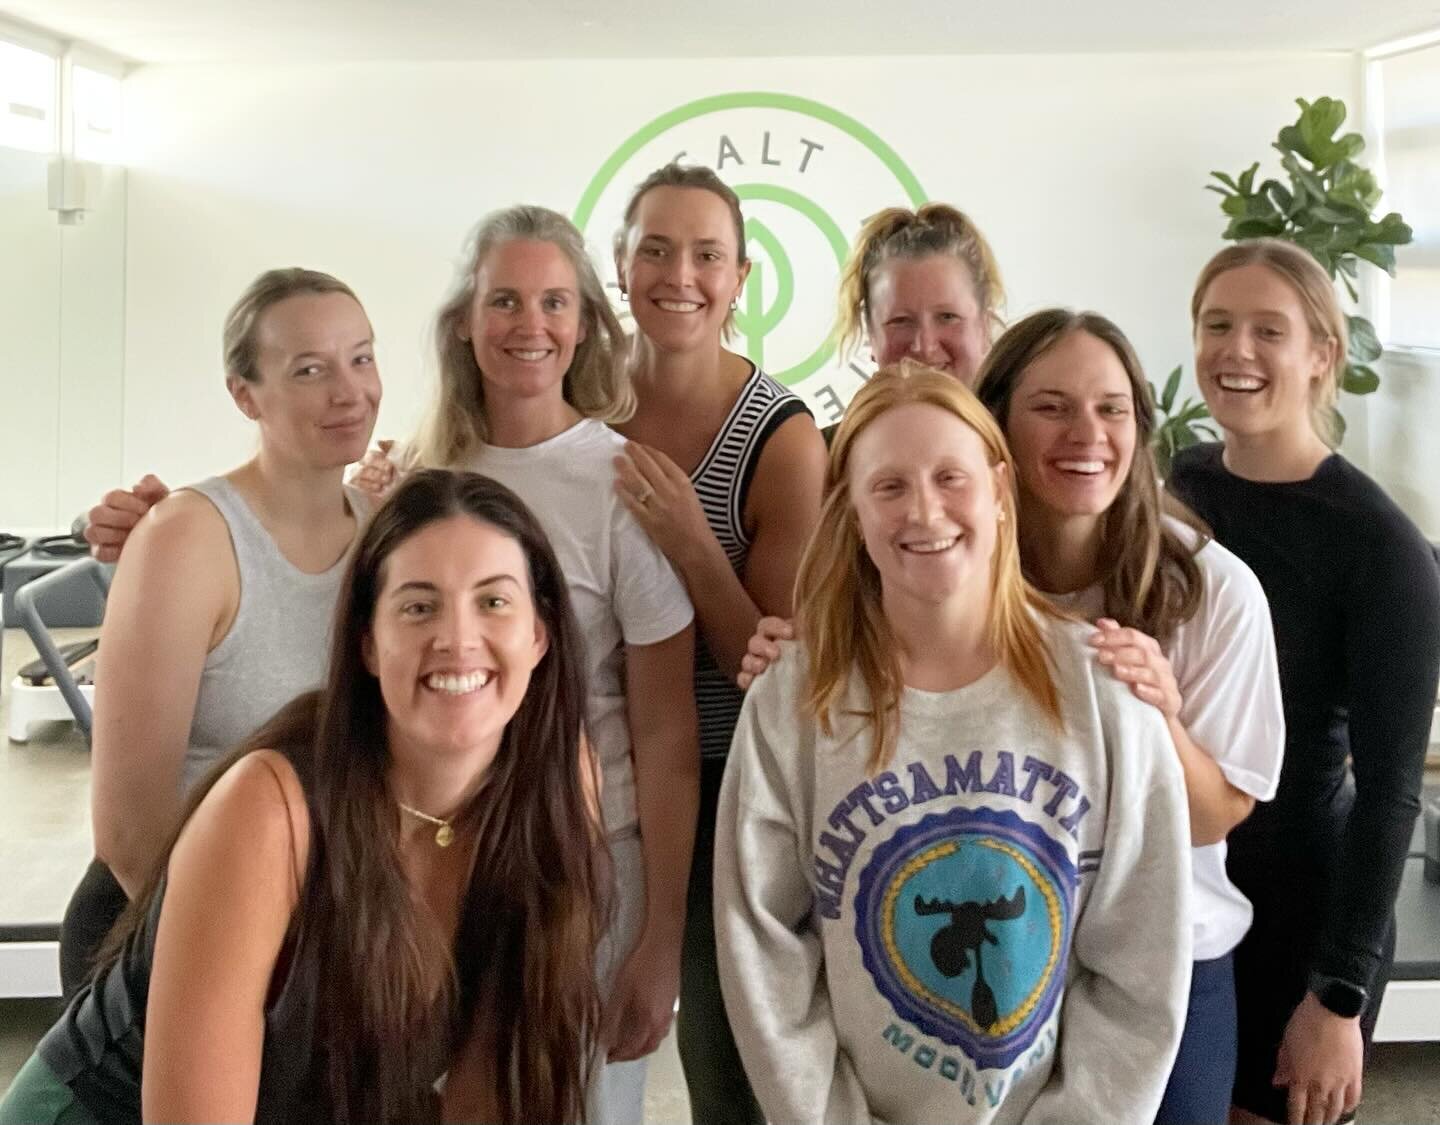 Today the Salt team got together for a little bit of self care and were taken through a breath-work and meditation session with the wonderful Taylor from @breathetoconnect 🧘&zwj;♀️🙏🏻✨
We all walked away feeling so much more refreshed, revitalized 